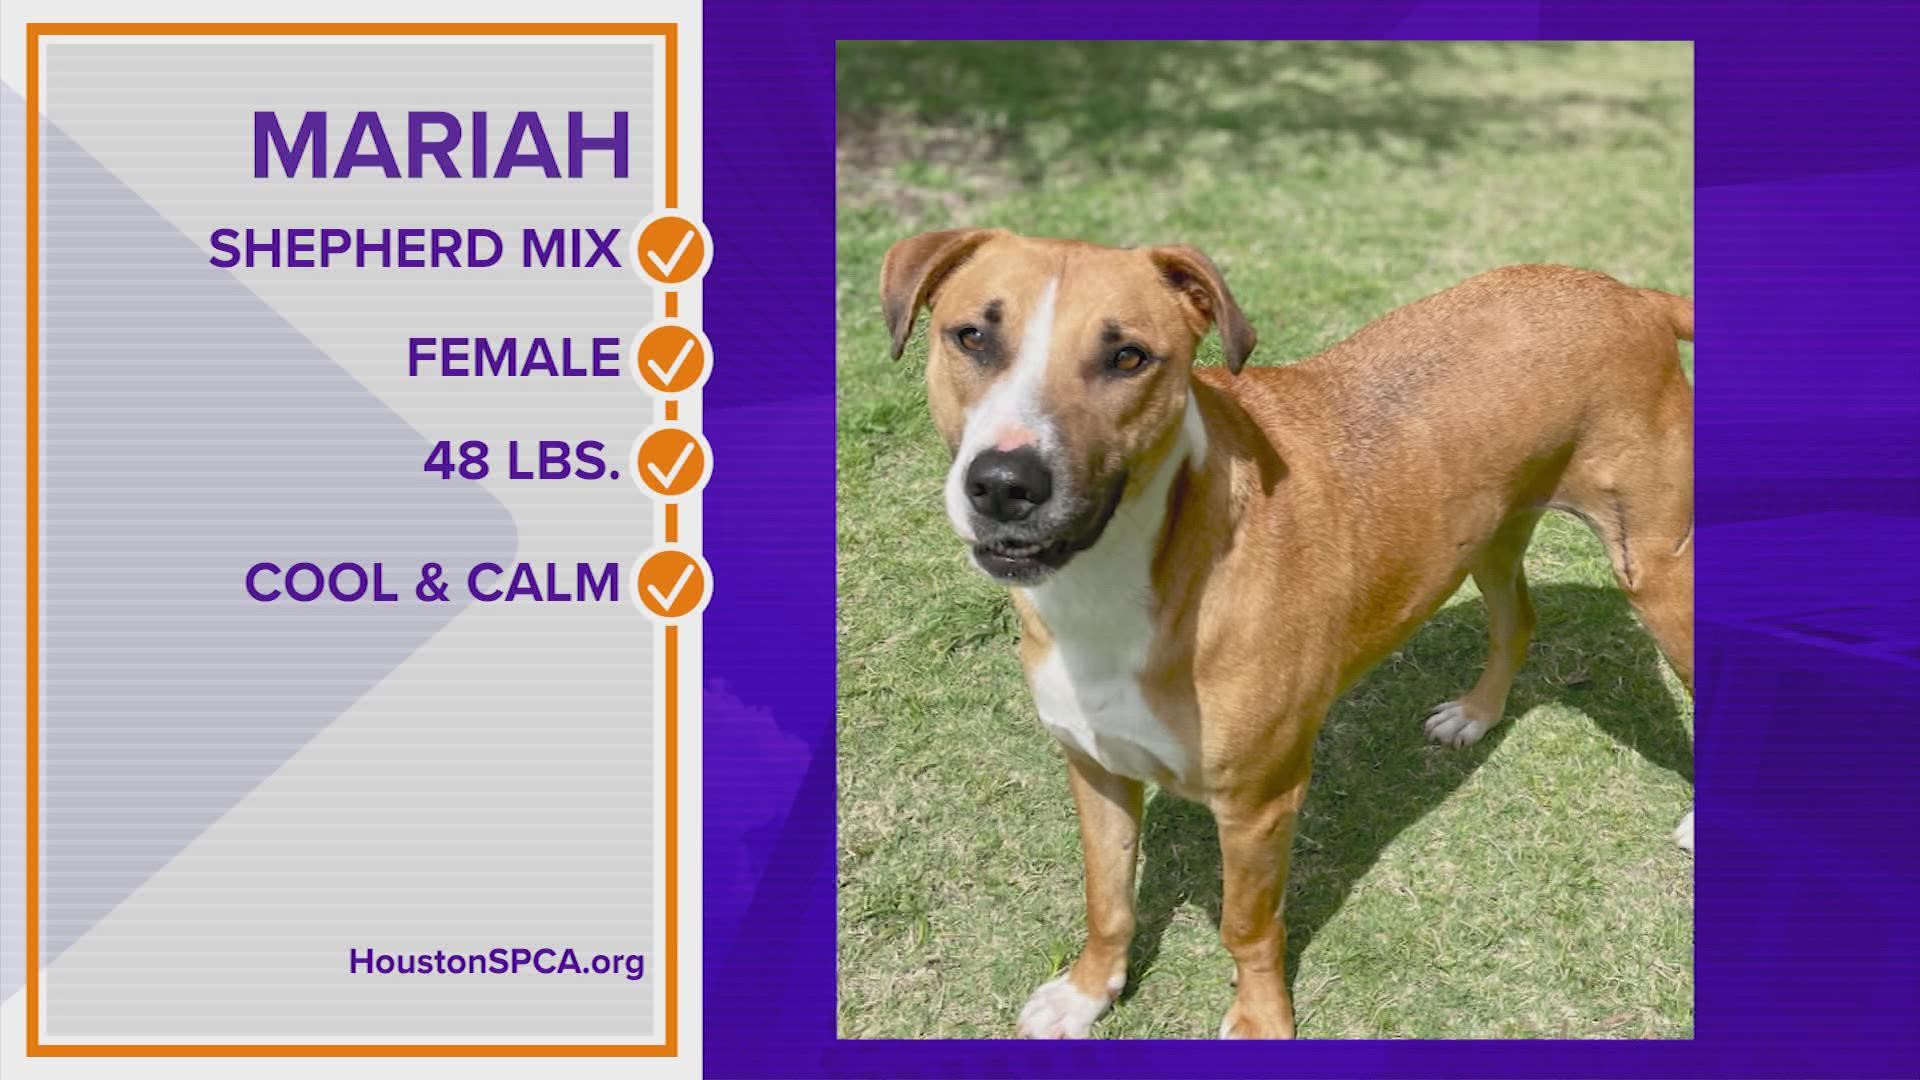 This pretty shepherd mix is calm and a little shy but she'll warm up quickly once she gets to know you. Go to HoustonSPCA.org to learn more about Mariah.